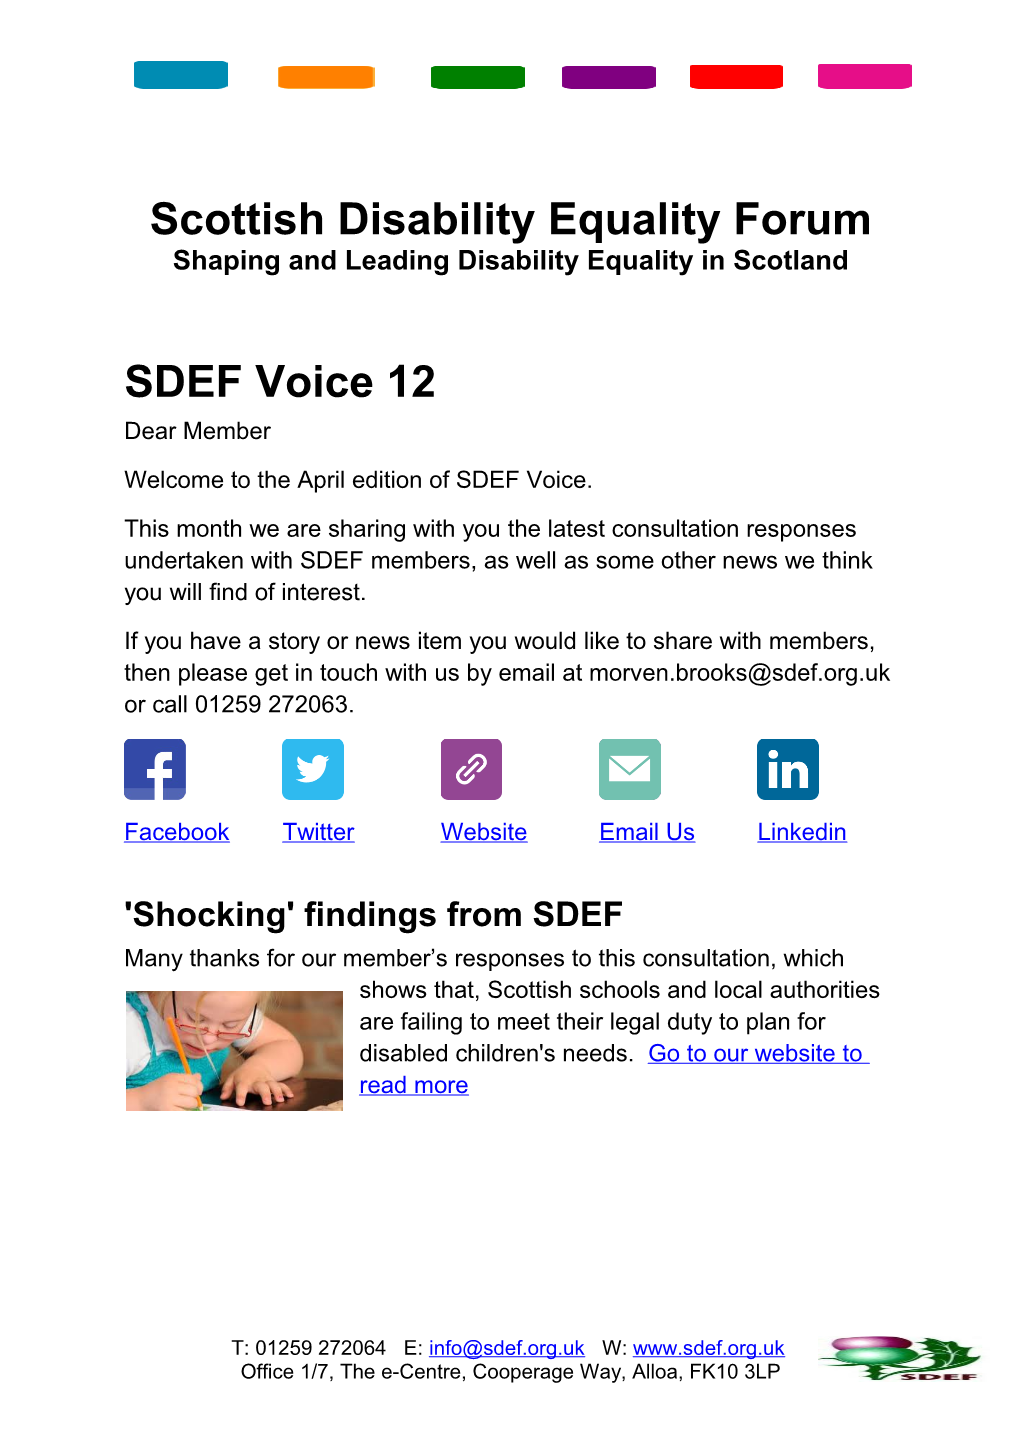 Welcome to the April Edition of SDEF Voice